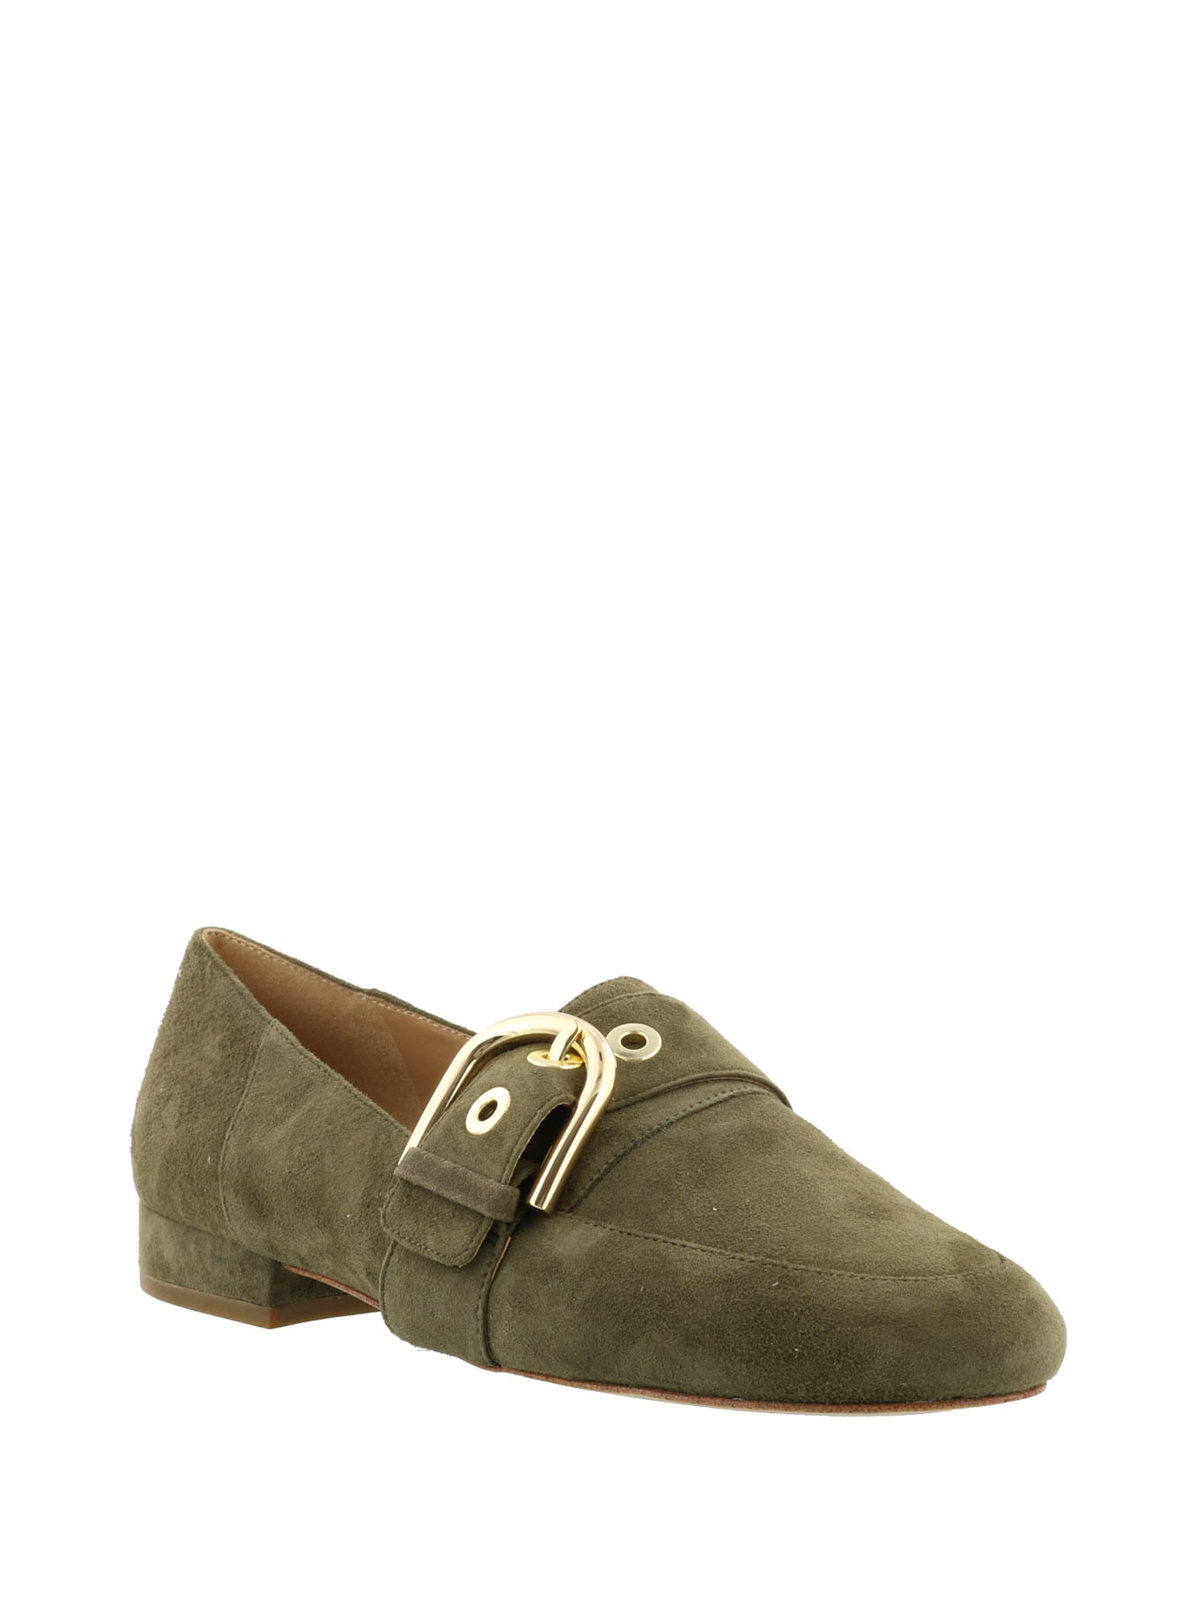 michael kors loafers green